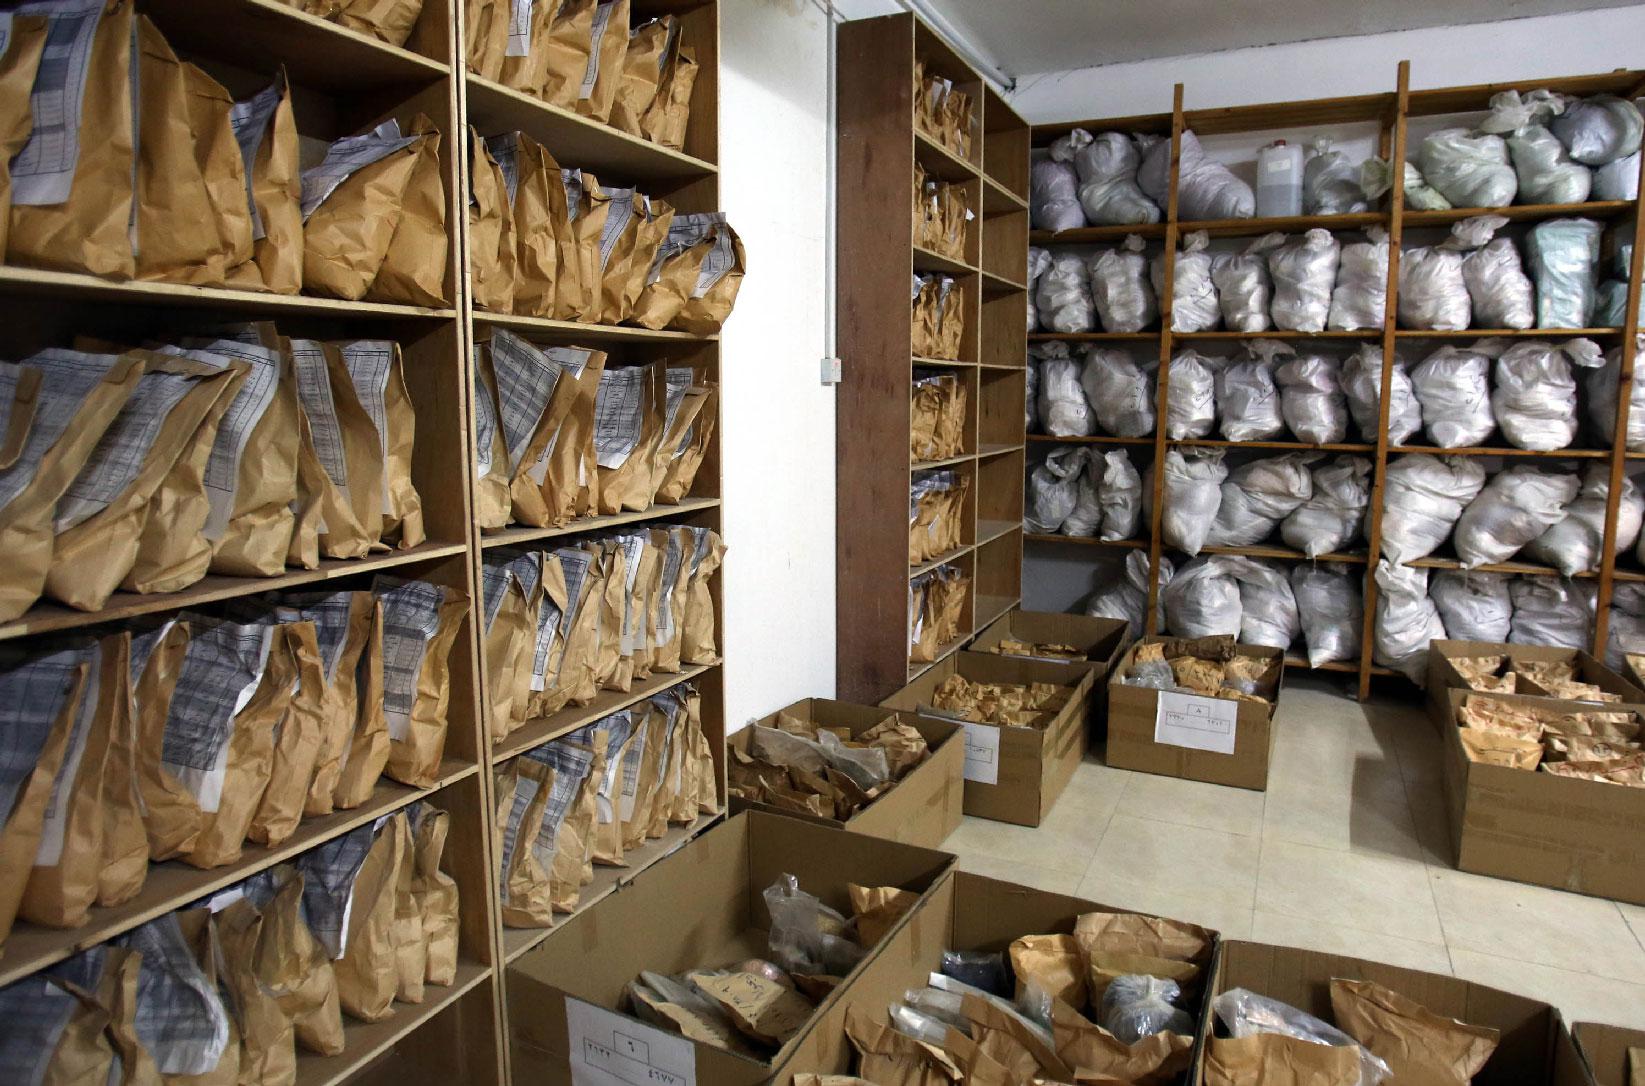 Bags containing confiscated drugs are displayed at the police anti-narcotics unit headquarters in Amman on January 7, 2019.